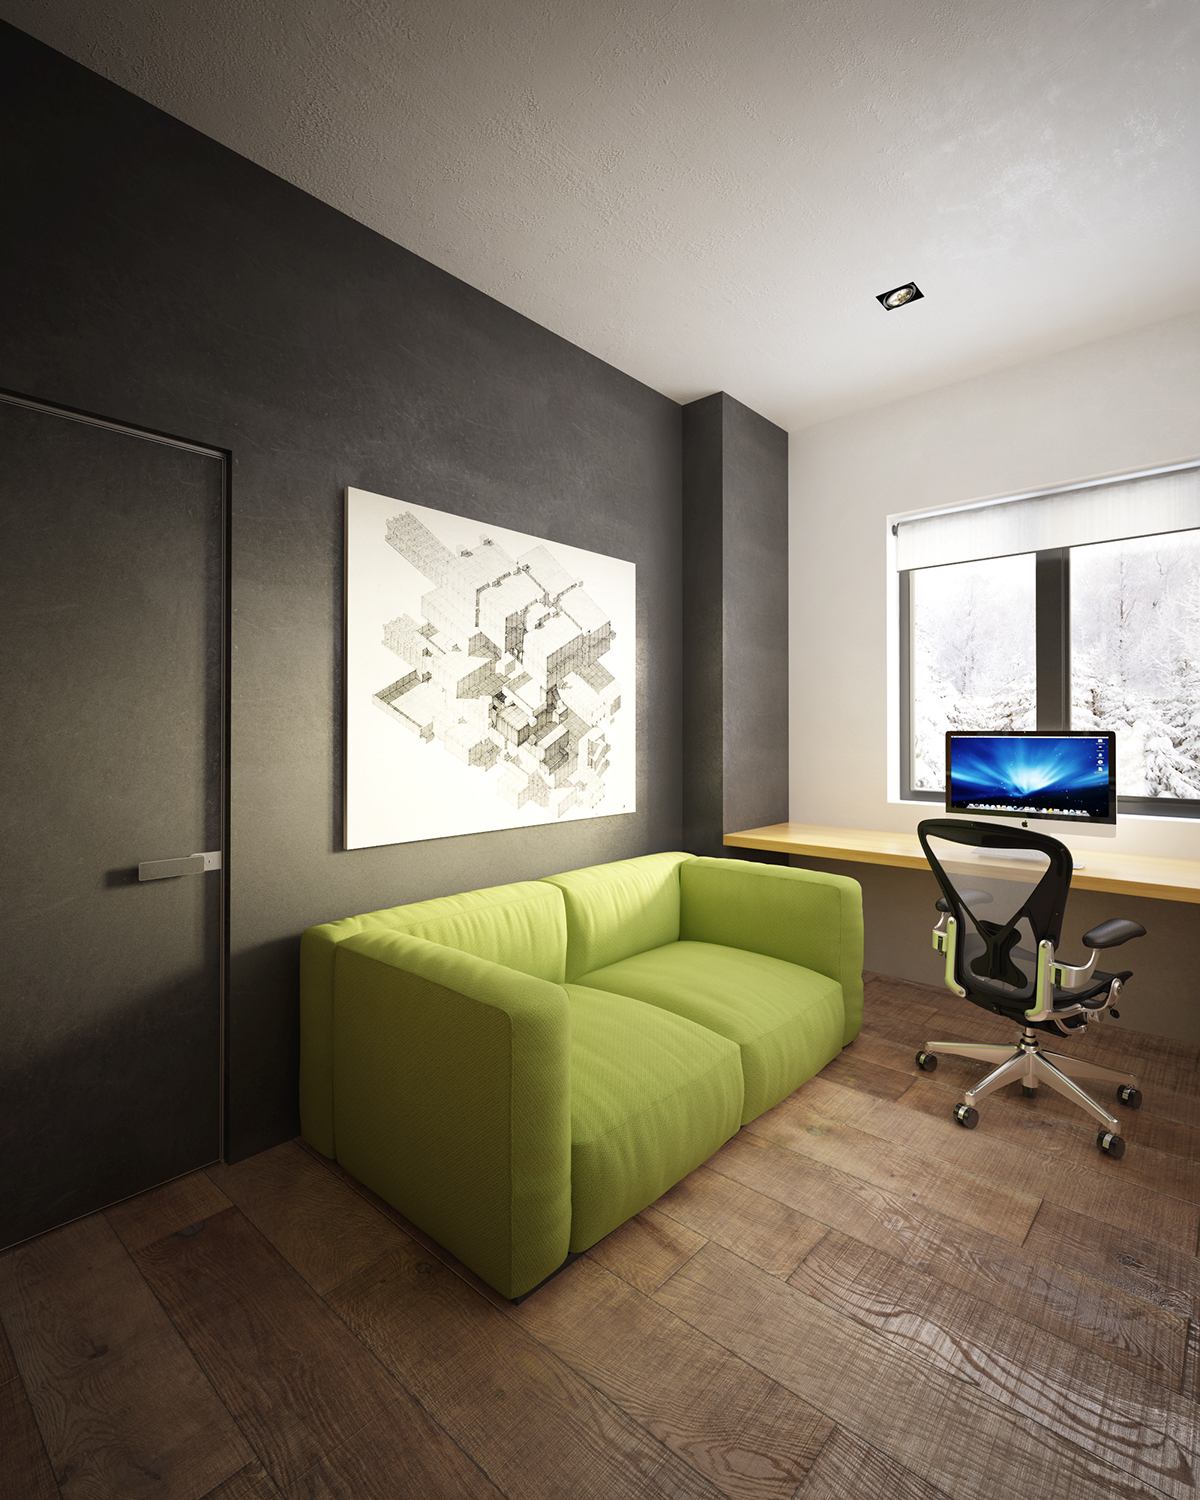 Office design "width =" 1200 "height =" 1500 "srcset =" https://mileray.com/wp-content/uploads/2020/05/1588505465_188_Vintage-Style-Is-One-Of-A-Great-Choice-For-Create.jpg 1200w, https: / / mileray.com/wp-content/uploads/2016/03/black-and-green-office-design-240x300.jpg 240w, https://mileray.com/wp-content/uploads/2016/03/black- and -green-office-design-768x960.jpg 768w, https://mileray.com/wp-content/uploads/2016/03/black-and-green-office-design-819x1024.jpg 819w, https: // myfashionos .com / wp-content / uploads / 2016/03 / black-and-green-office-design-696x870.jpg 696w, https://mileray.com/wp-content/uploads/2016/03/black-and - green-office-design-1068x1335.jpg 1068w, https://mileray.com/wp-content/uploads/2016/03/black-and-green-office-design-336x420.jpg 336w "size =" (max - Width: 1200px) 100vw, 1200px